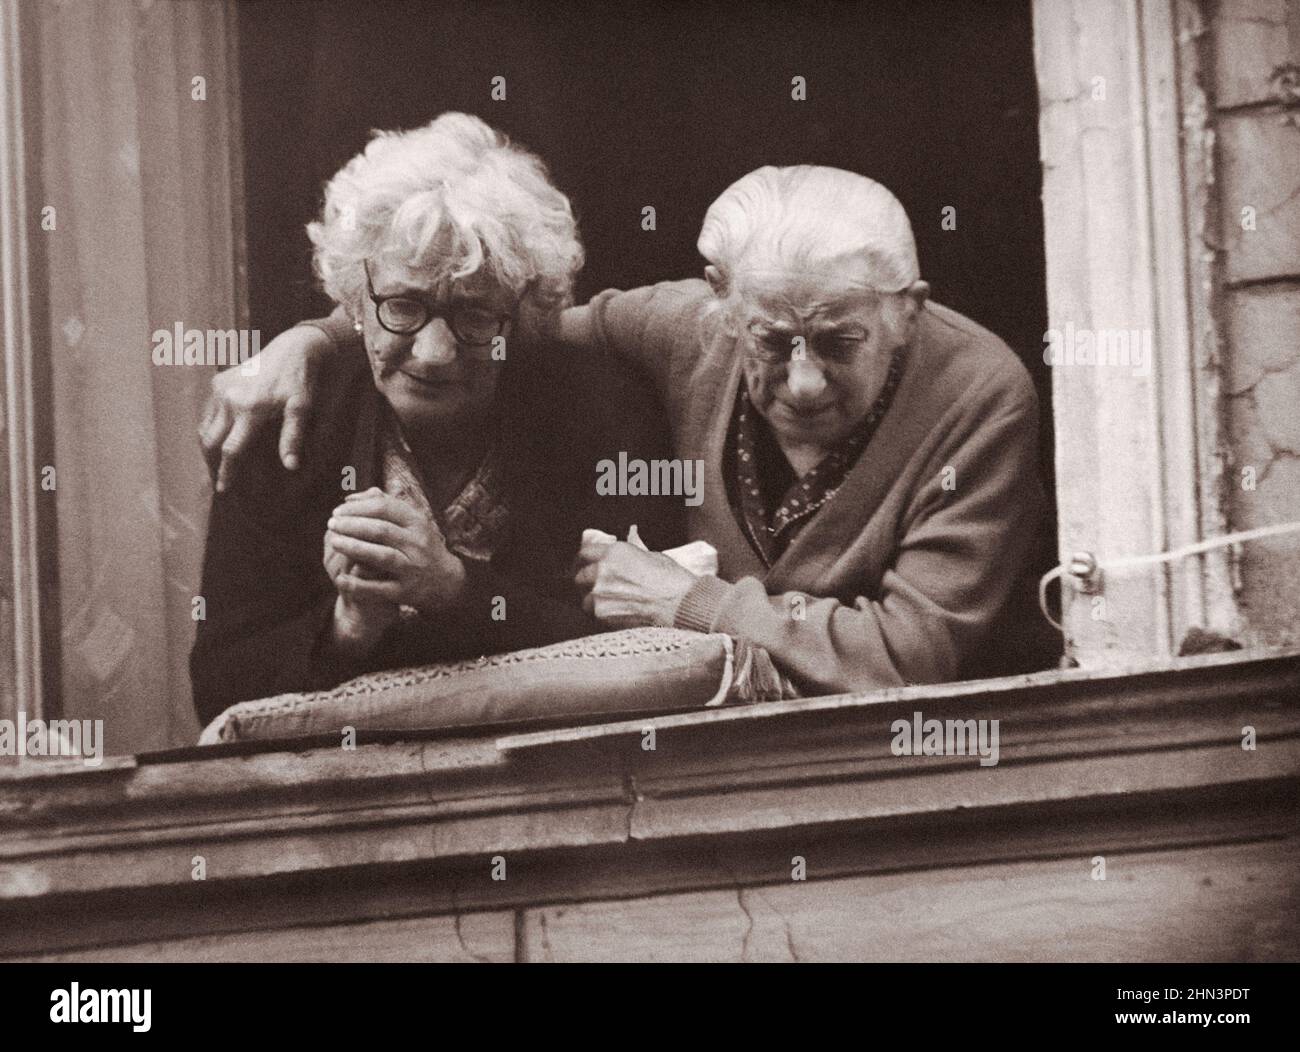 Vintage photo of Berlin Crisis of 1961: Building the Wall. Two Women on the Eastern Side of the Berlin Wall Show Their Emotions of Longing for Freedom Stock Photo